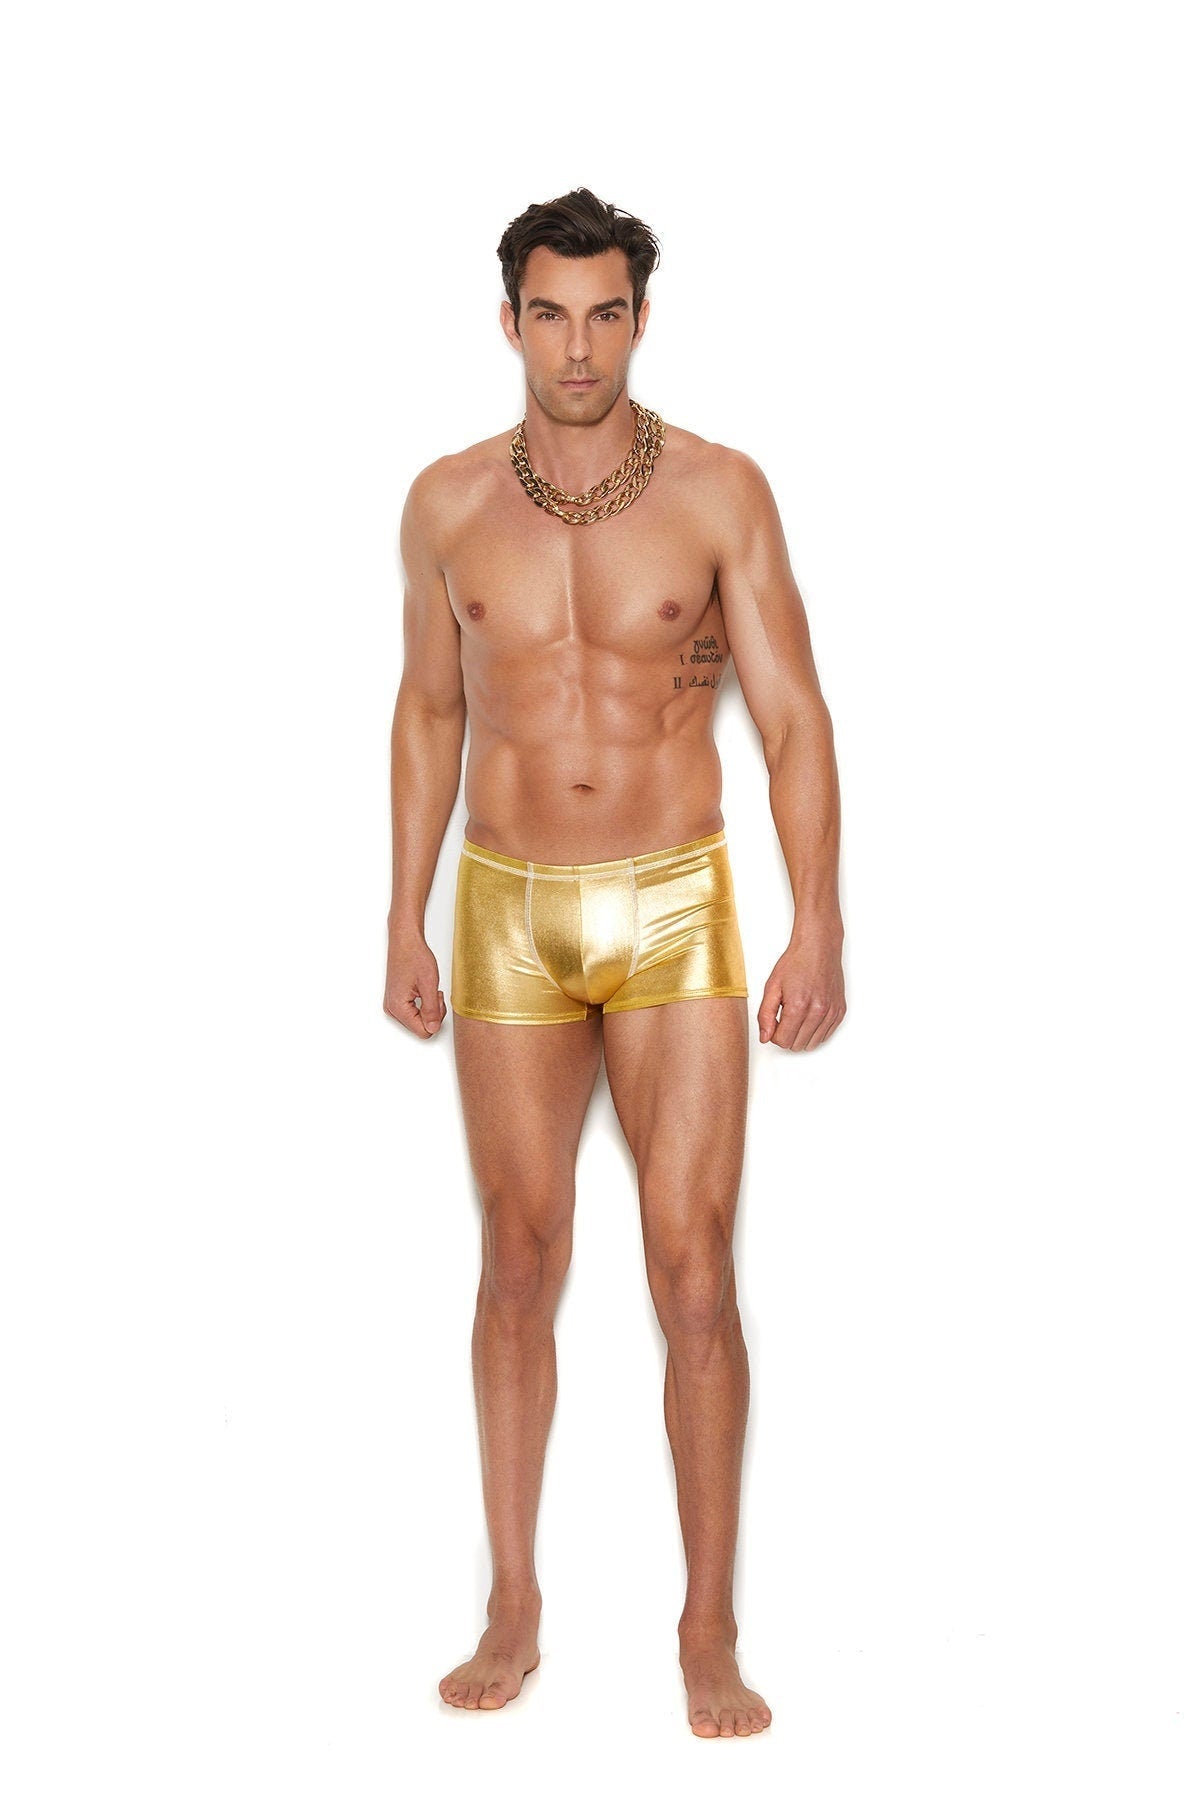 Men's gold boxer briefs made from luxurious gold lame fabric with a comfortable front pouch for enhanced support. 